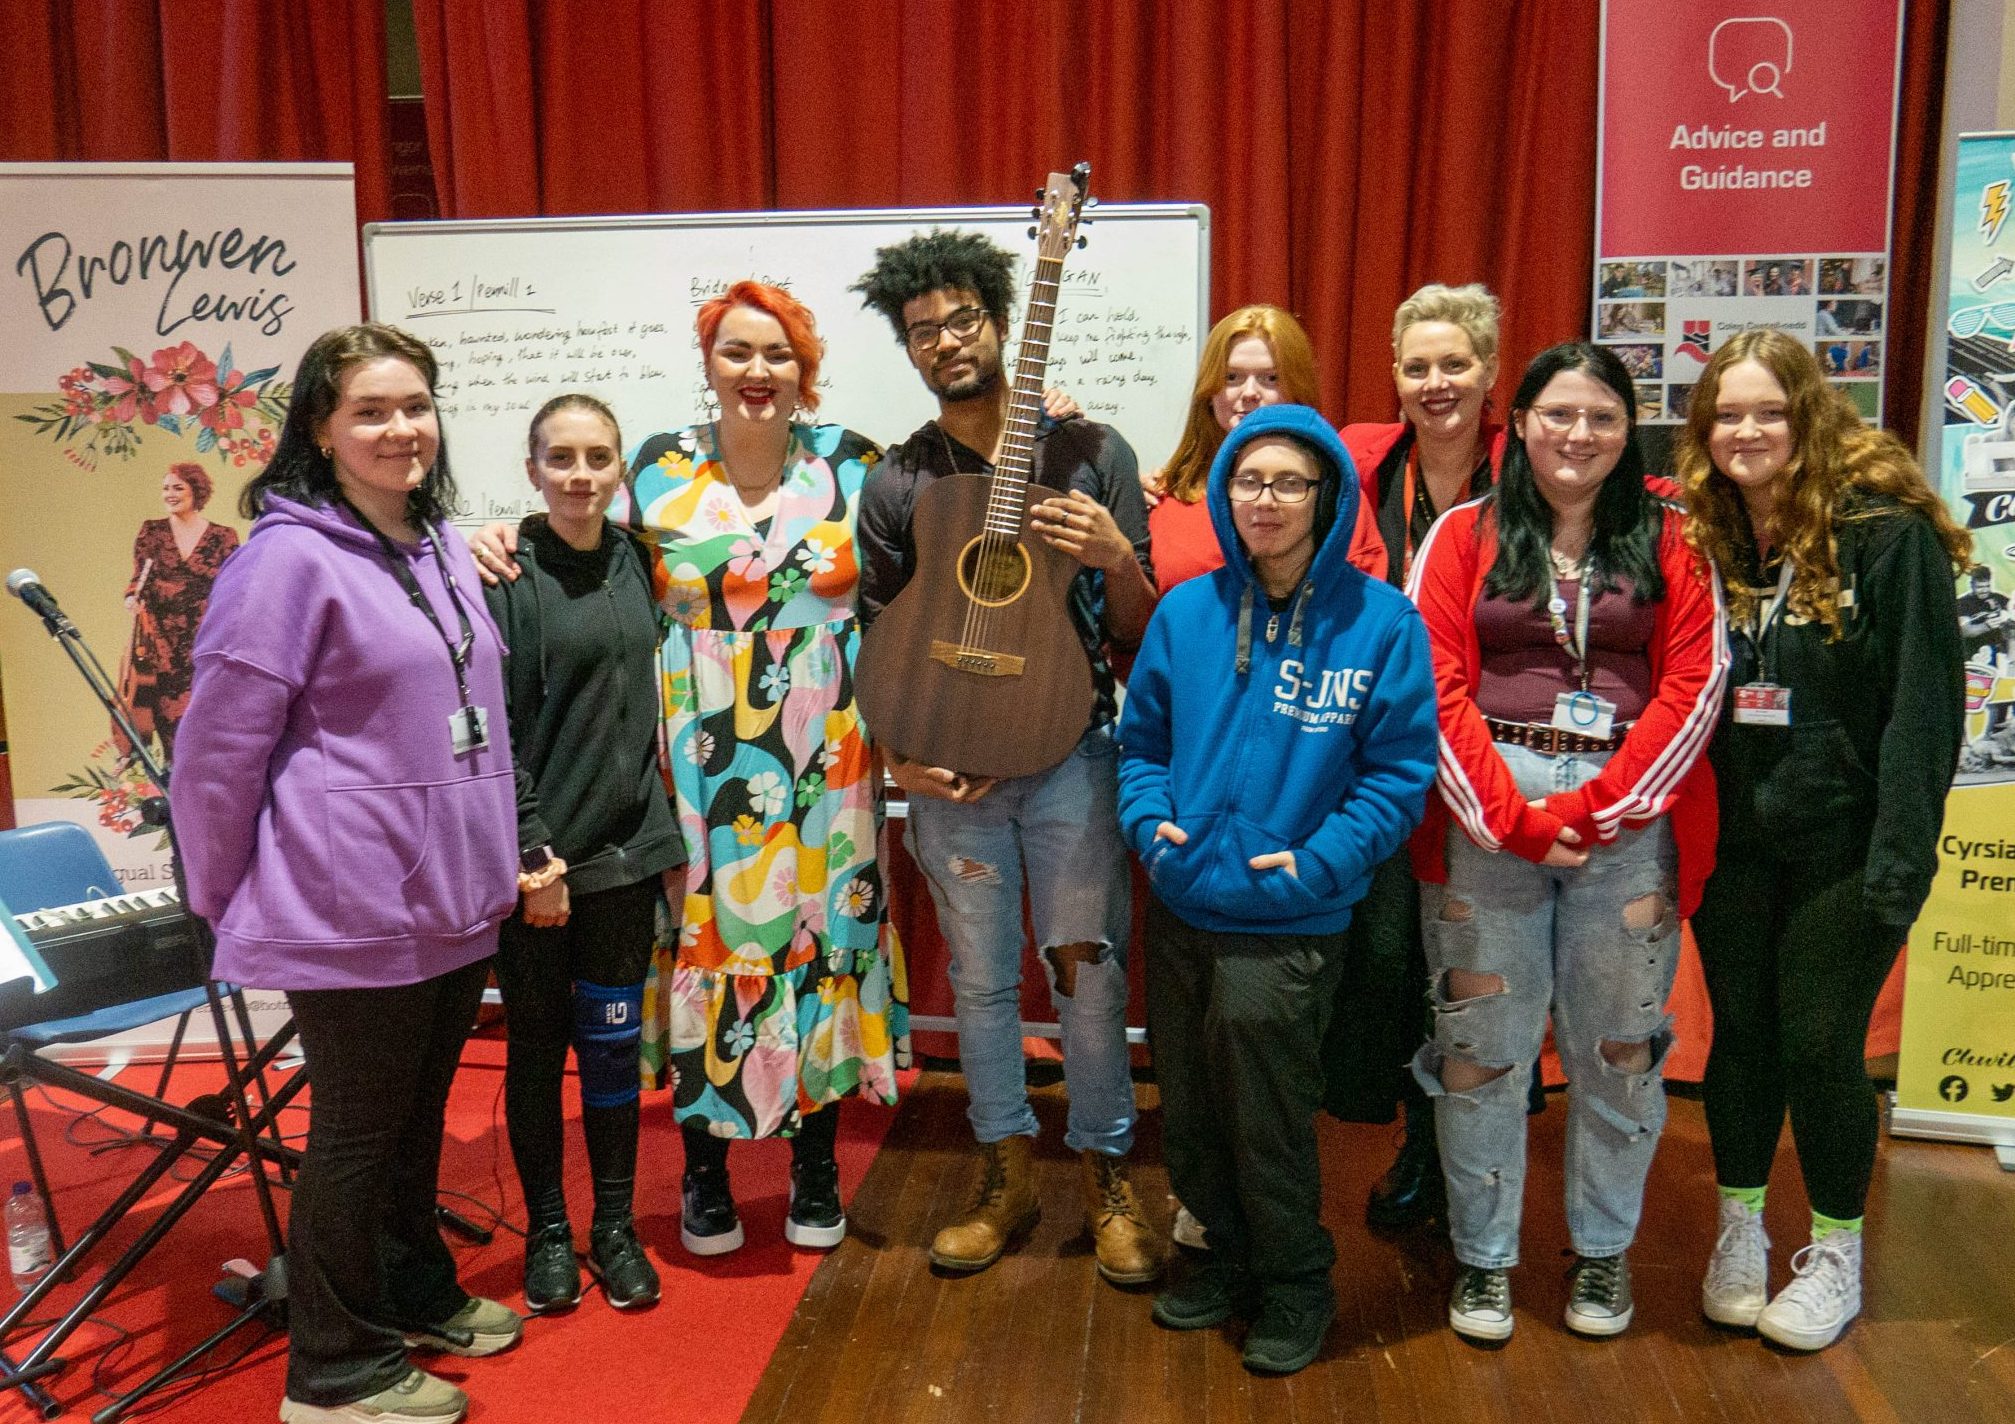 Singer Bronwen Lewis with a group of College students after writing their own song